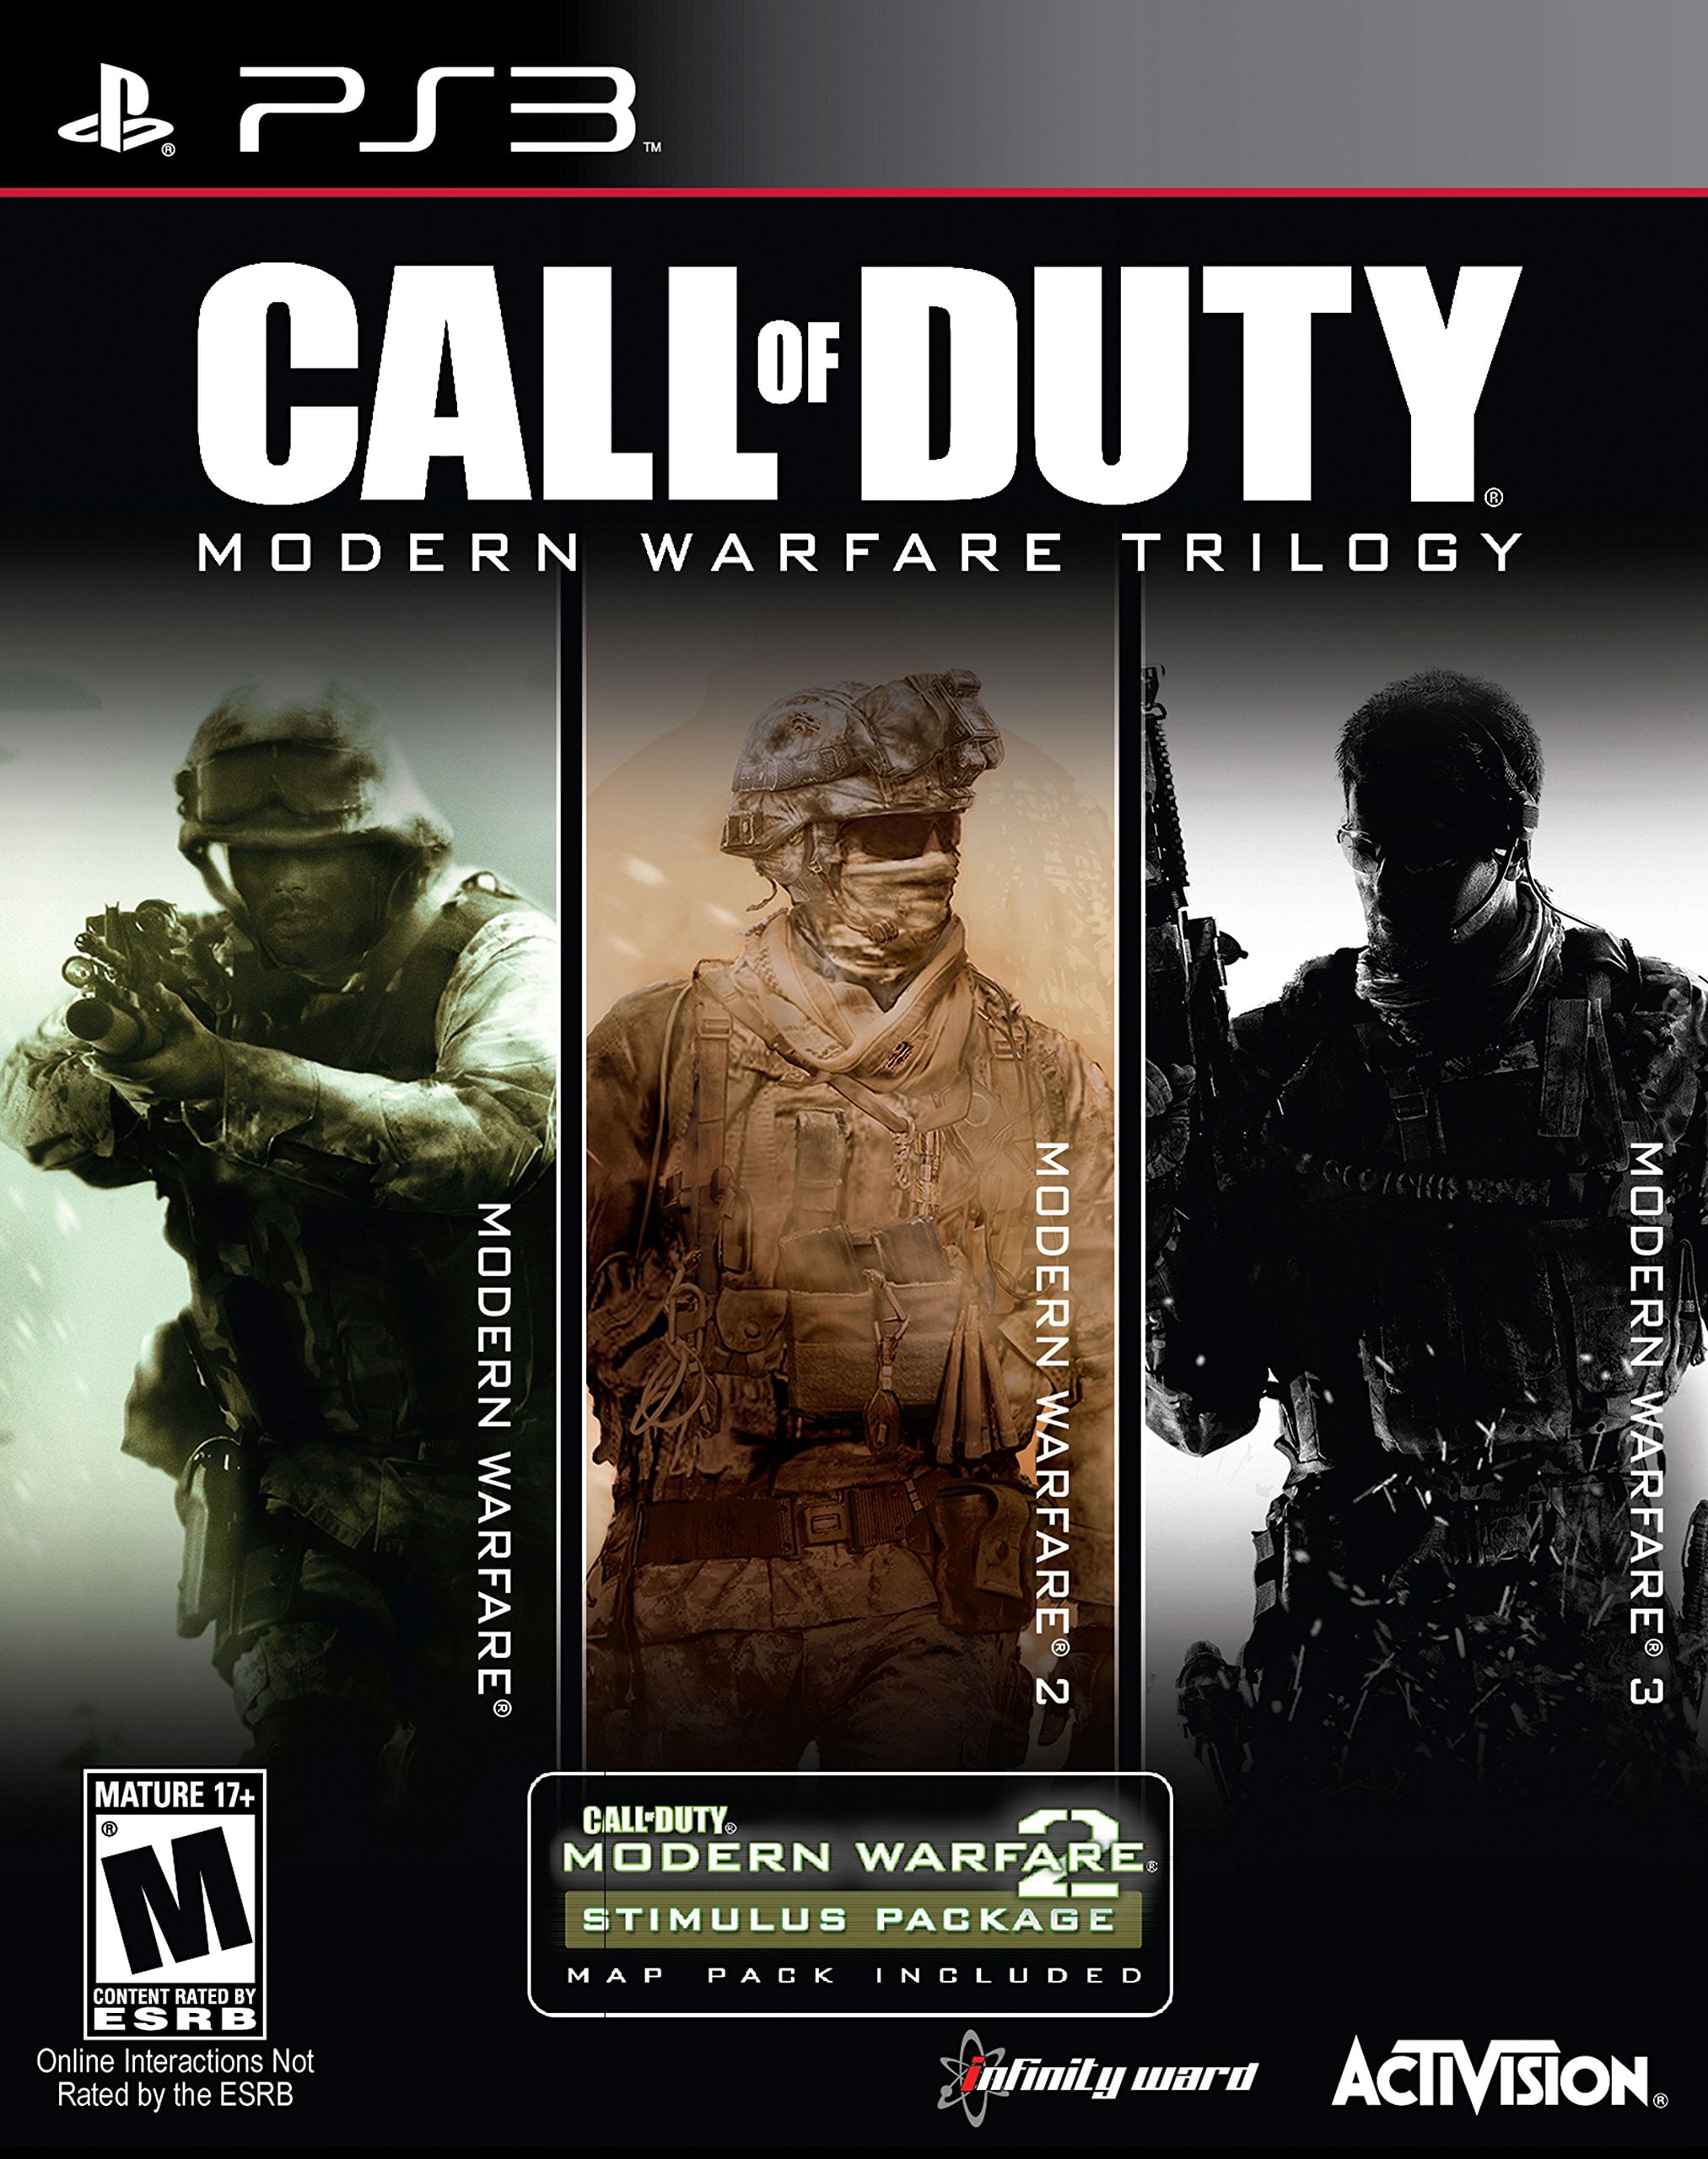 Call of Duty: Modern Warfare Trilogy [3 Discs], Activision